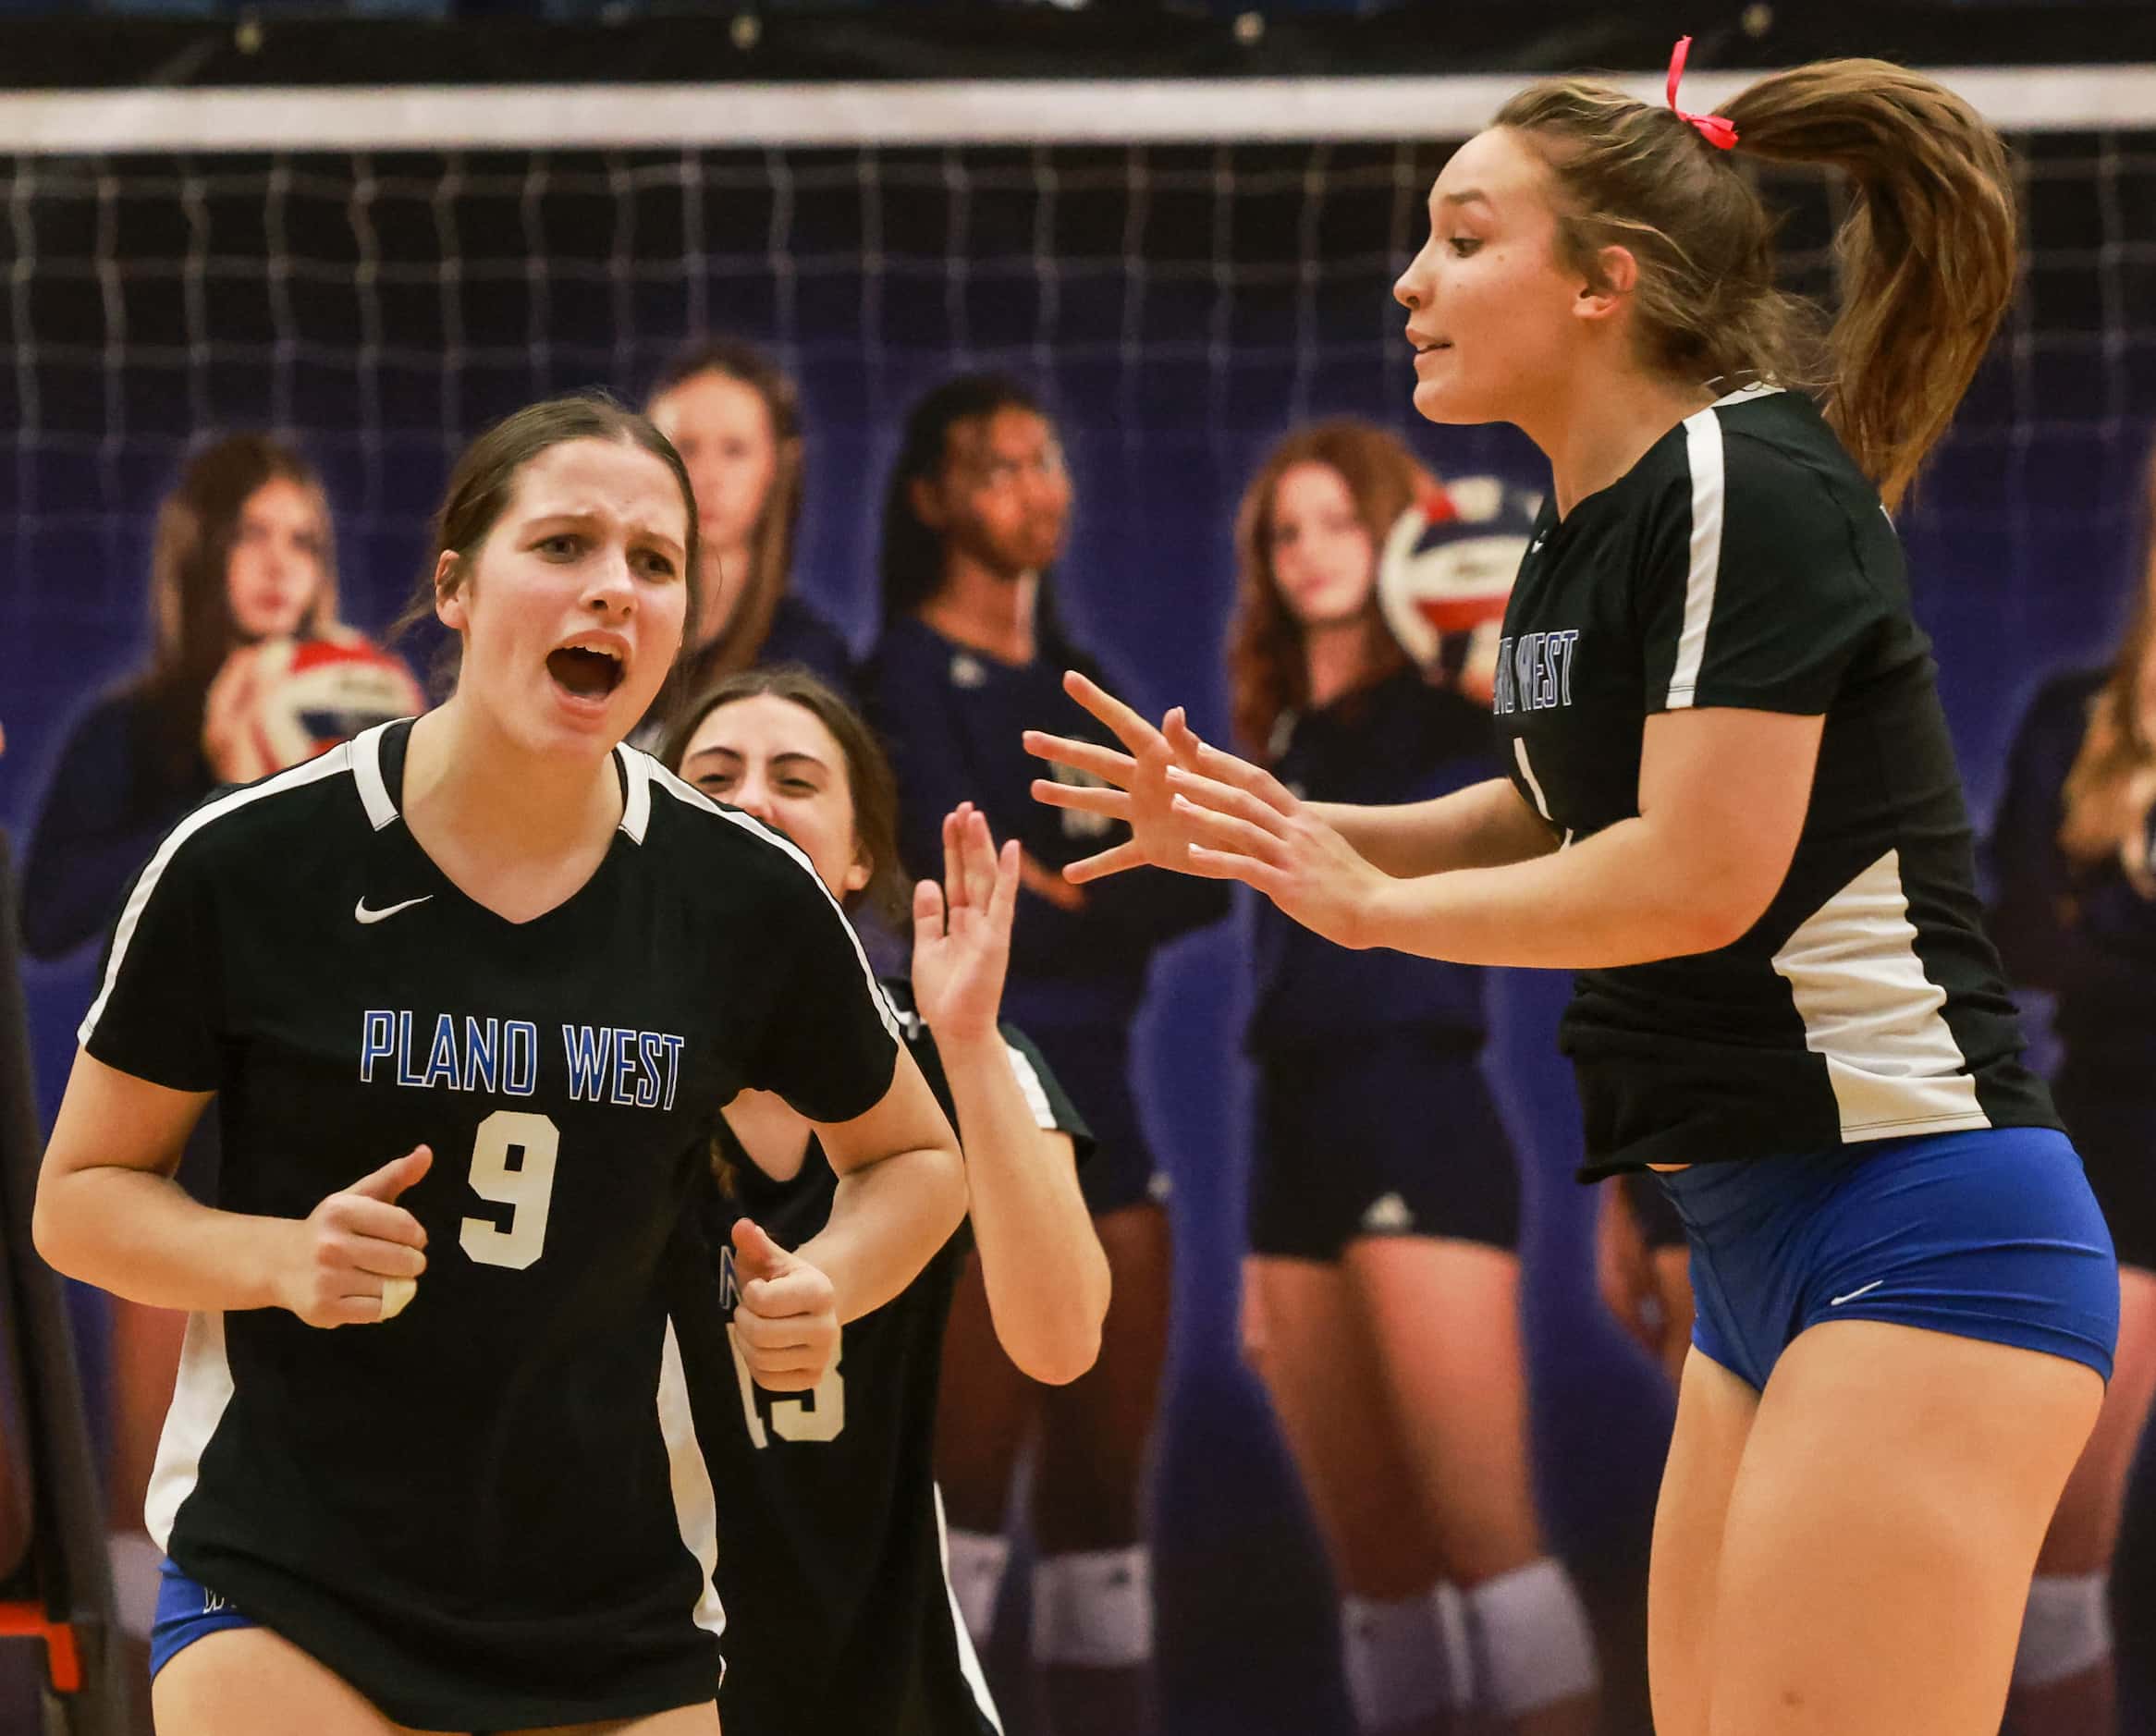 Plano West Senior High Ansley Denison (9) cheers after blocking the ball while teammate...